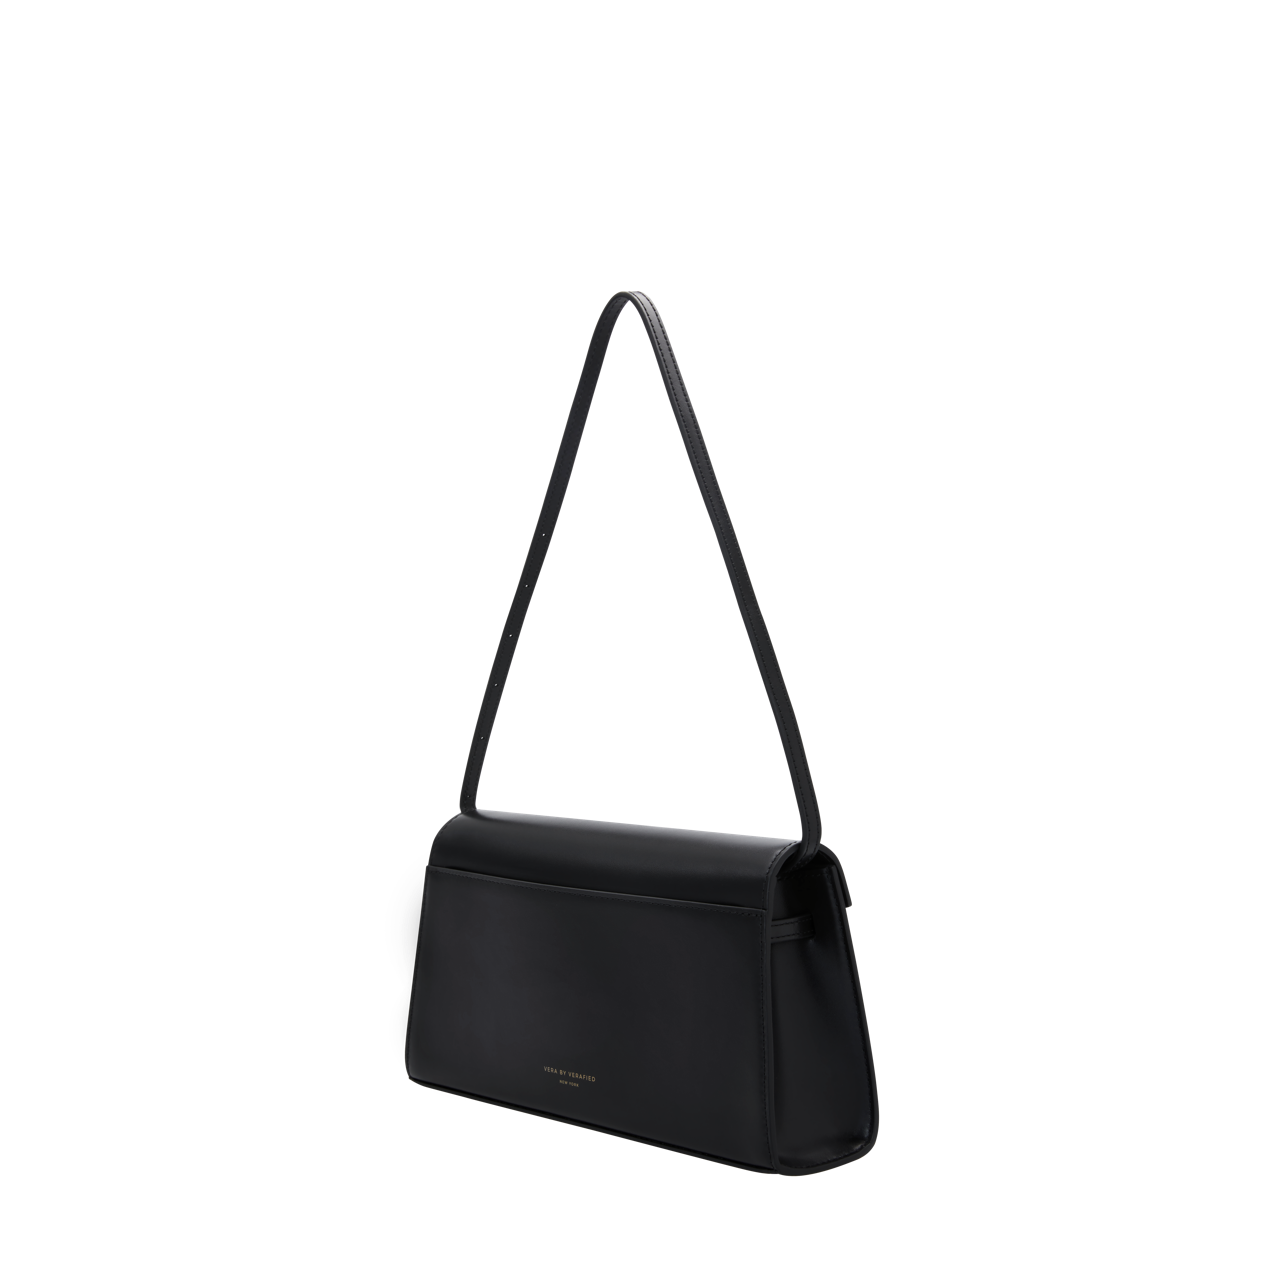 Noir Allure Shoulder Bag (Pre-Order Only. Will Ship May 27th)